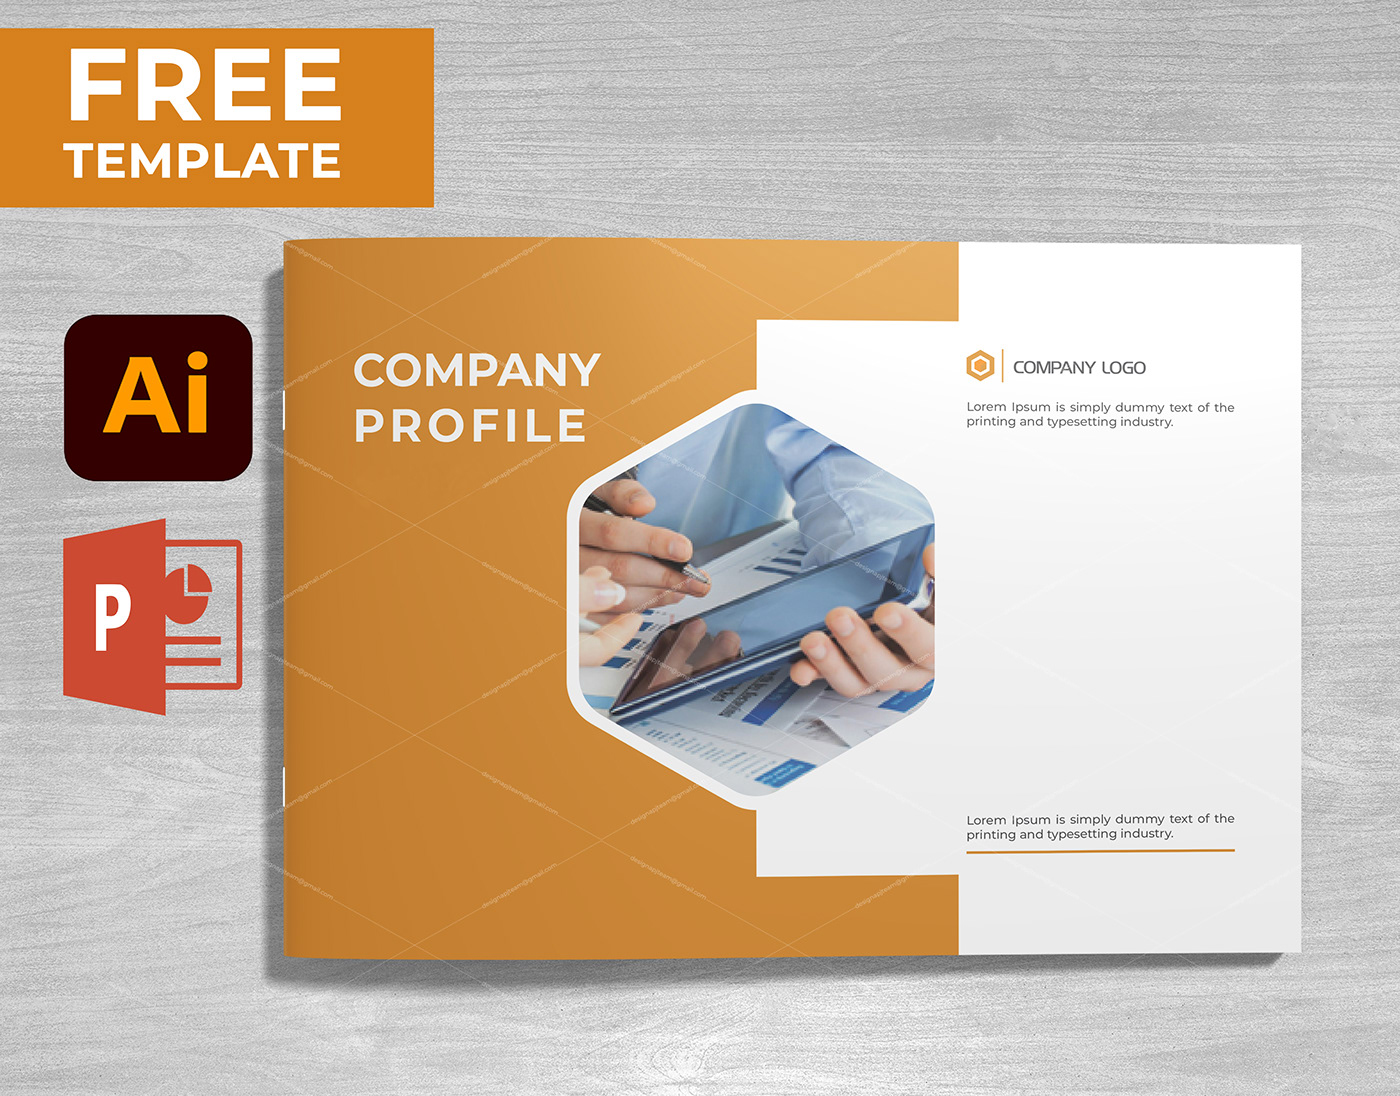 Company Profile Brochure FREE Template Download on Behance Throughout Adobe Illustrator Brochure Templates Free Download